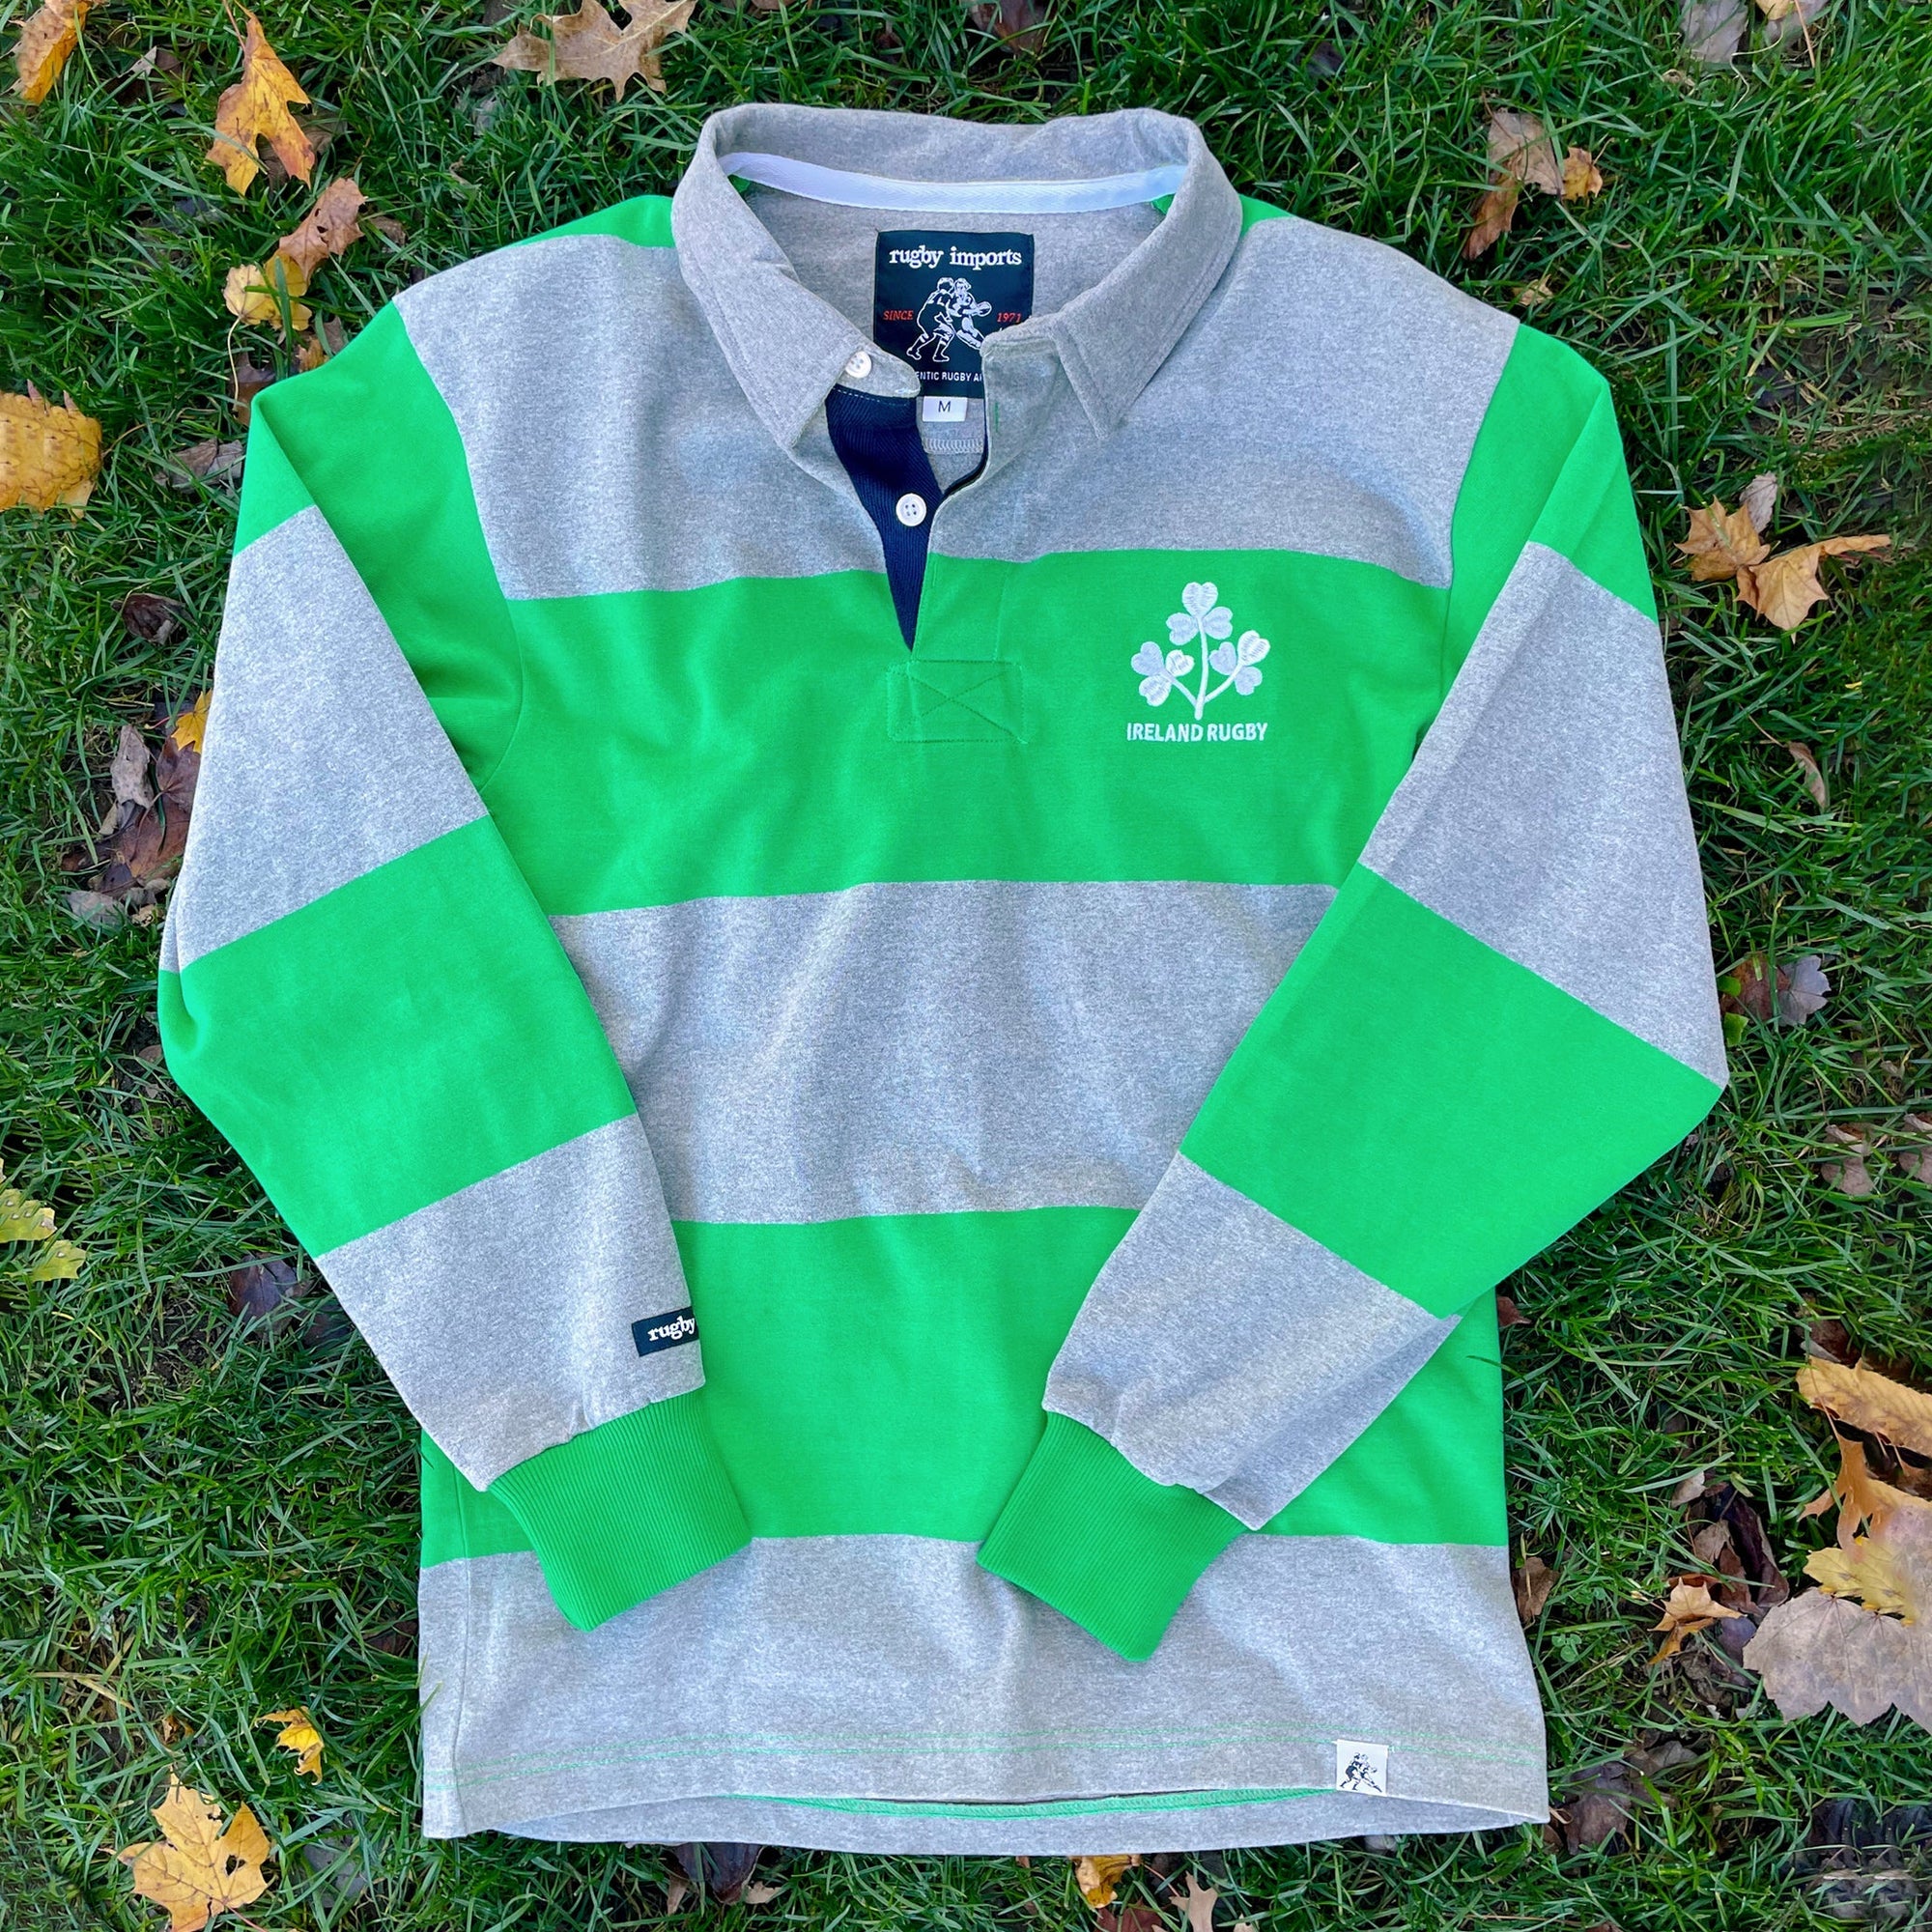 Traditional Rugby Shirts - Rugby Imports